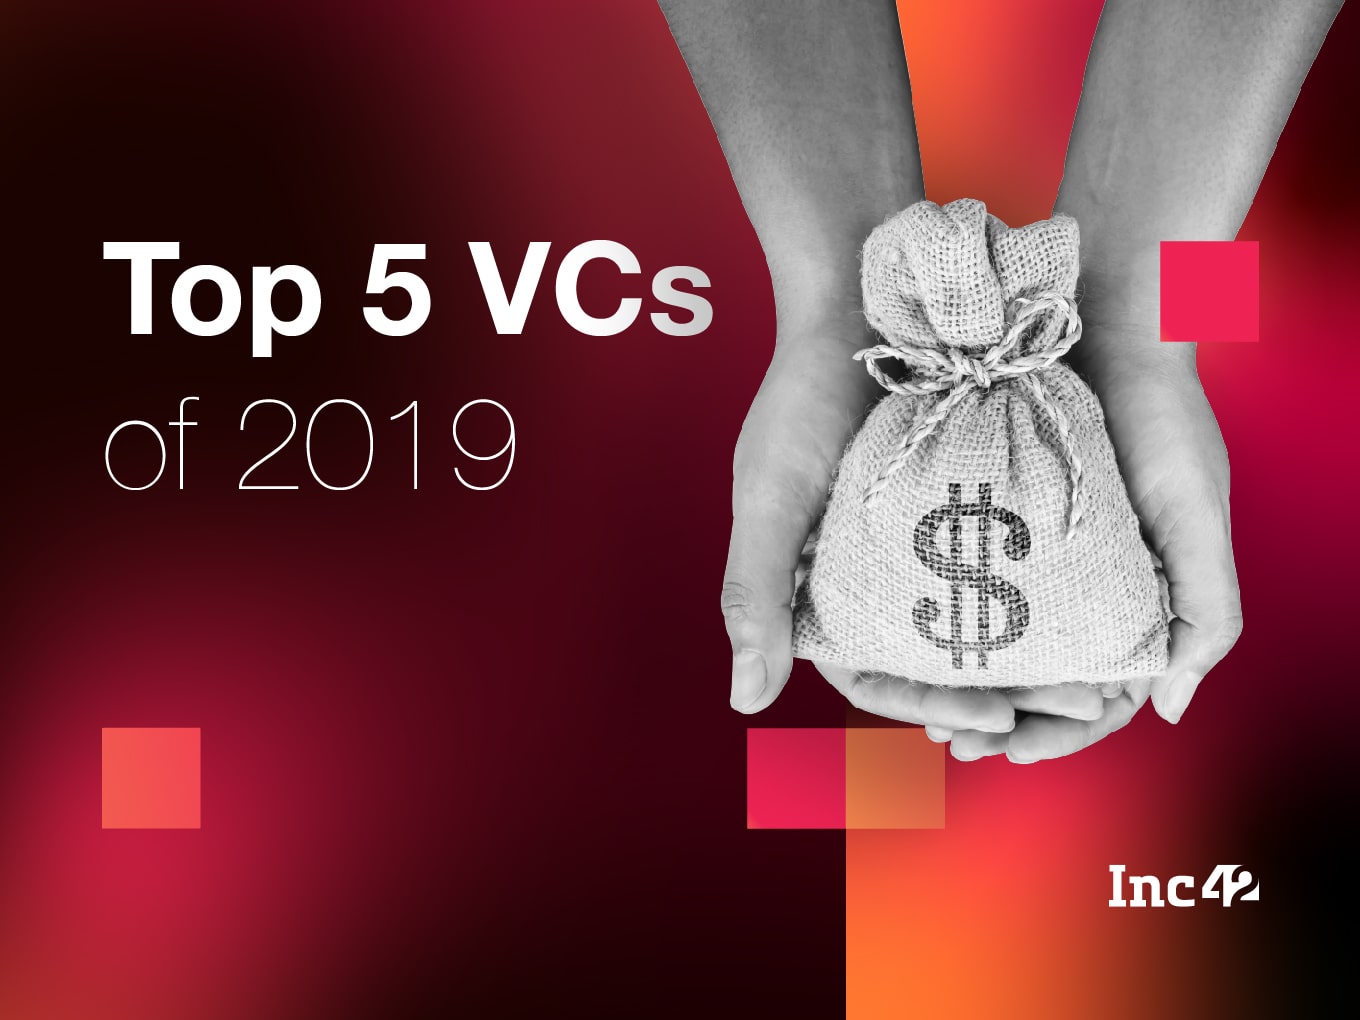 Sequoia Tops VC Funding In 2019 With Over 2X Growth Thanks To Surge